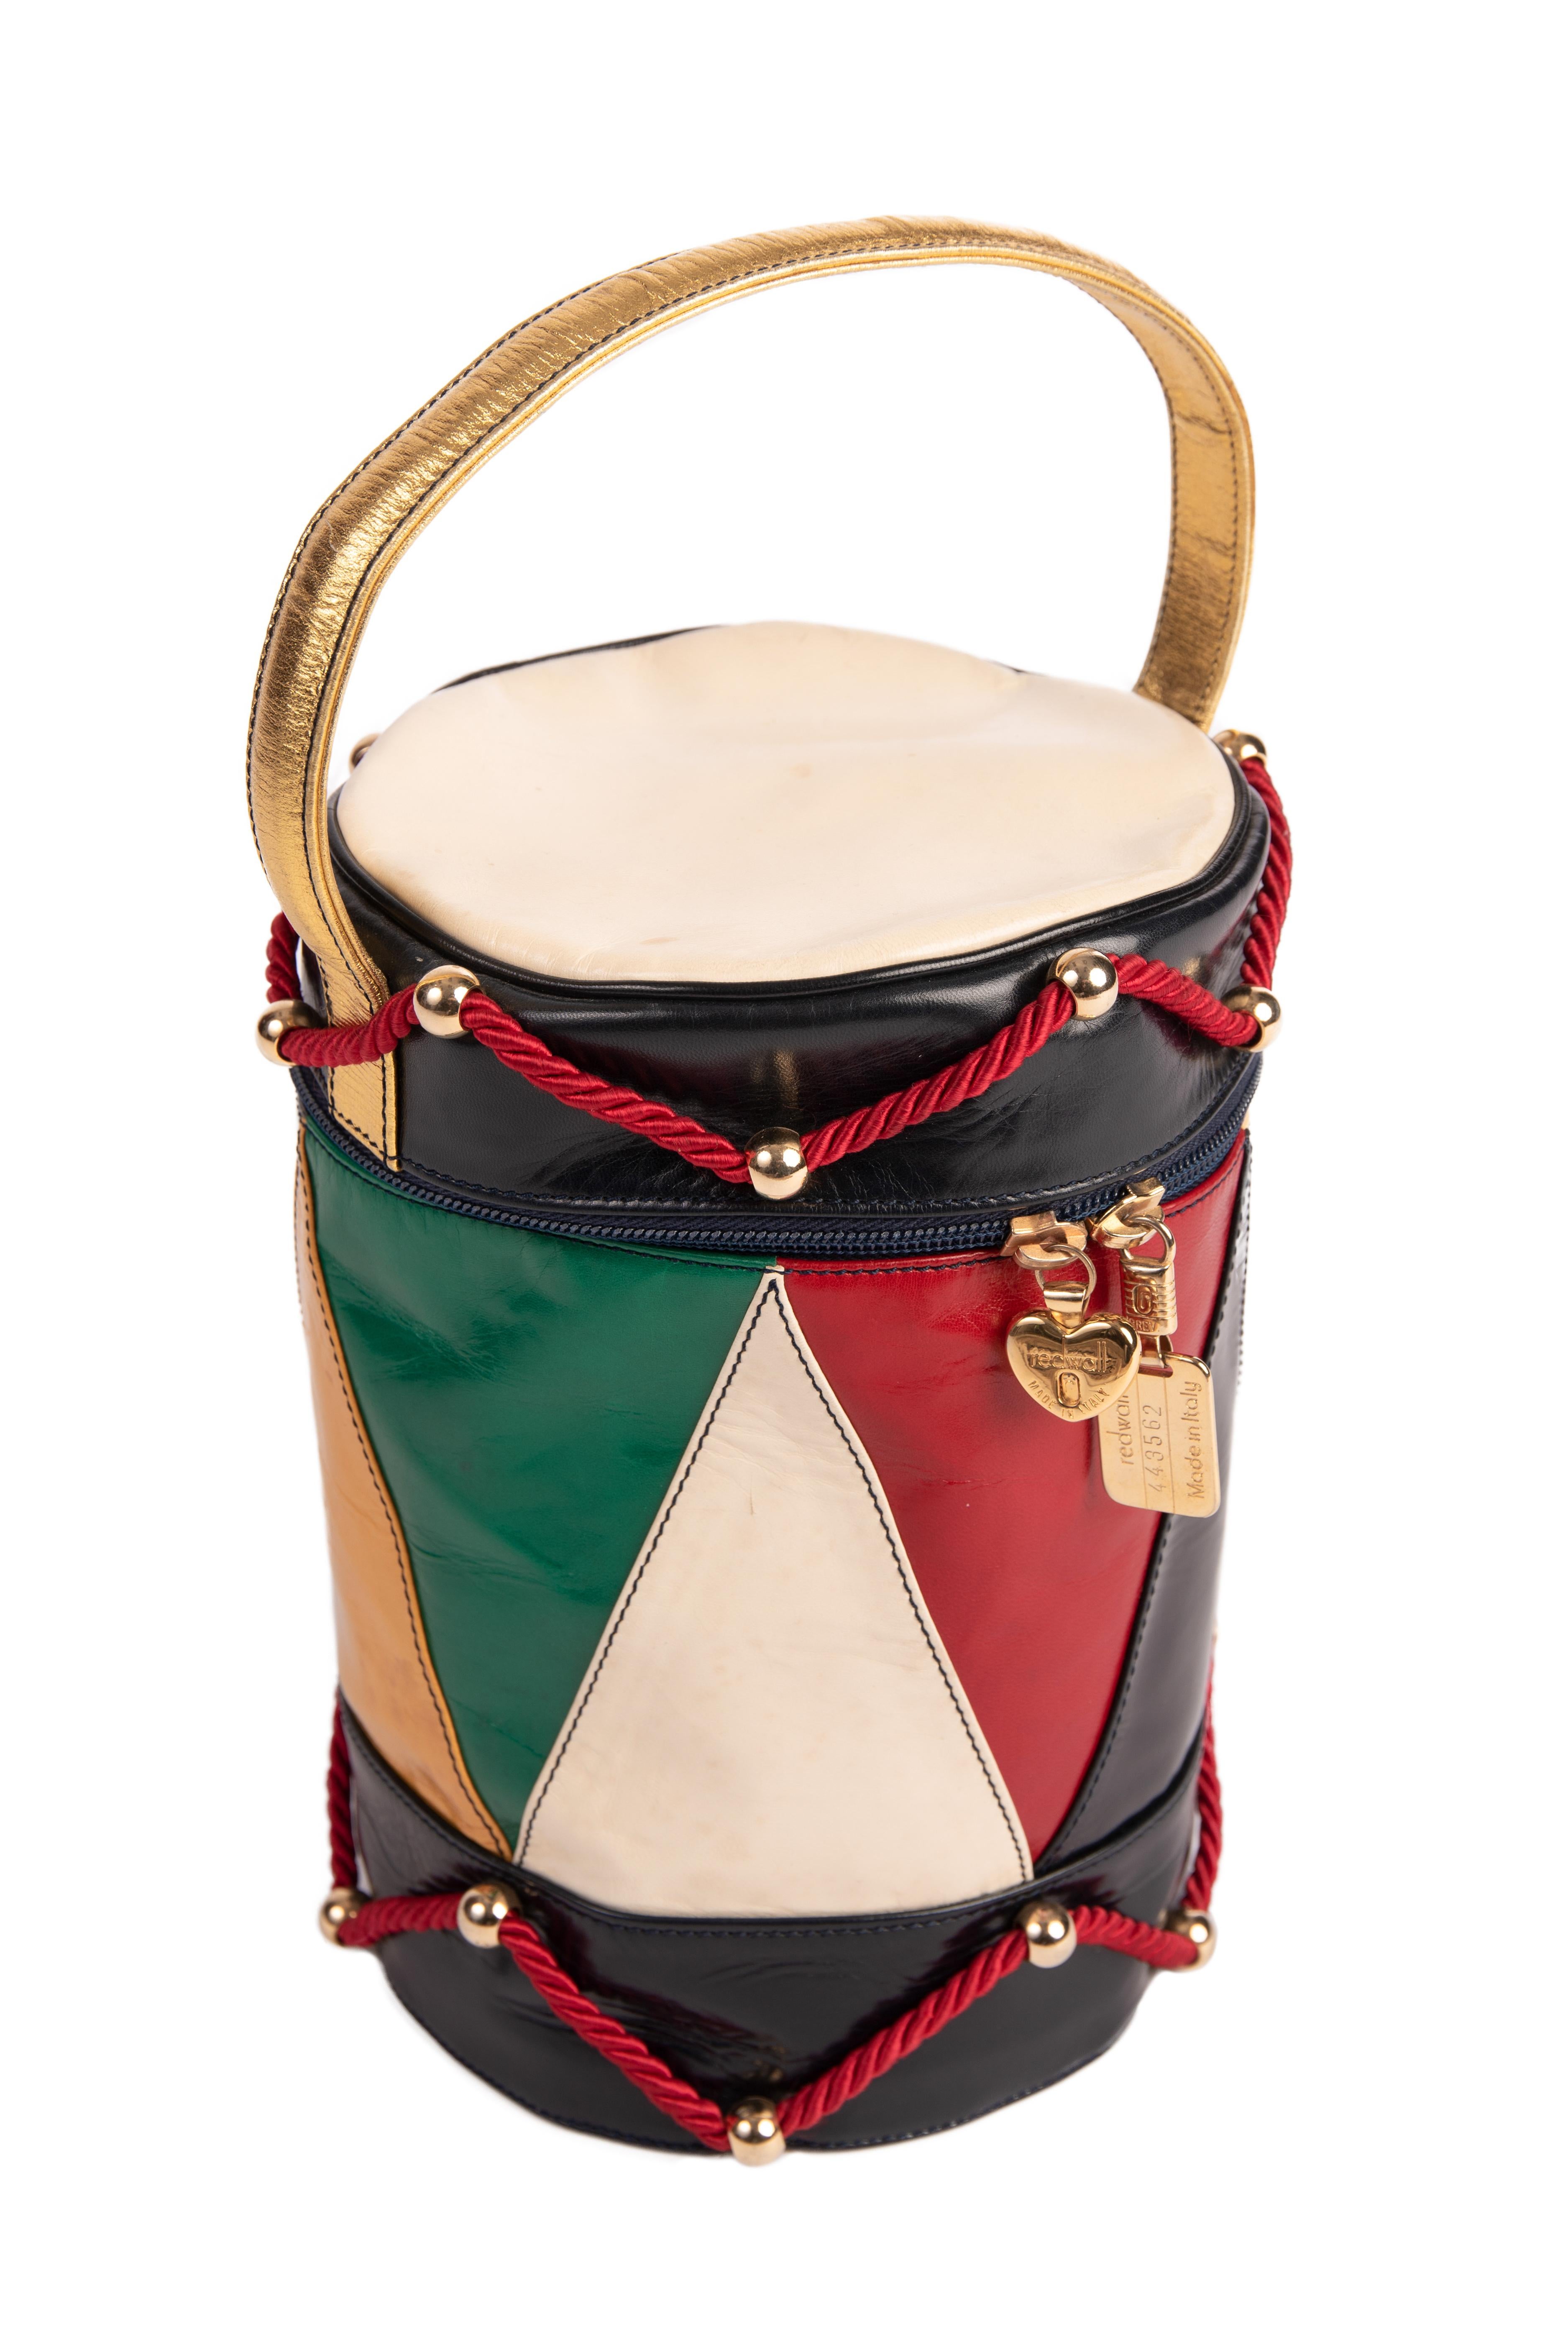 MOSCHINO Redwall Drum Novelty Top Handle Bag, late 1980s/early 1990s In Good Condition For Sale In Munich, DE